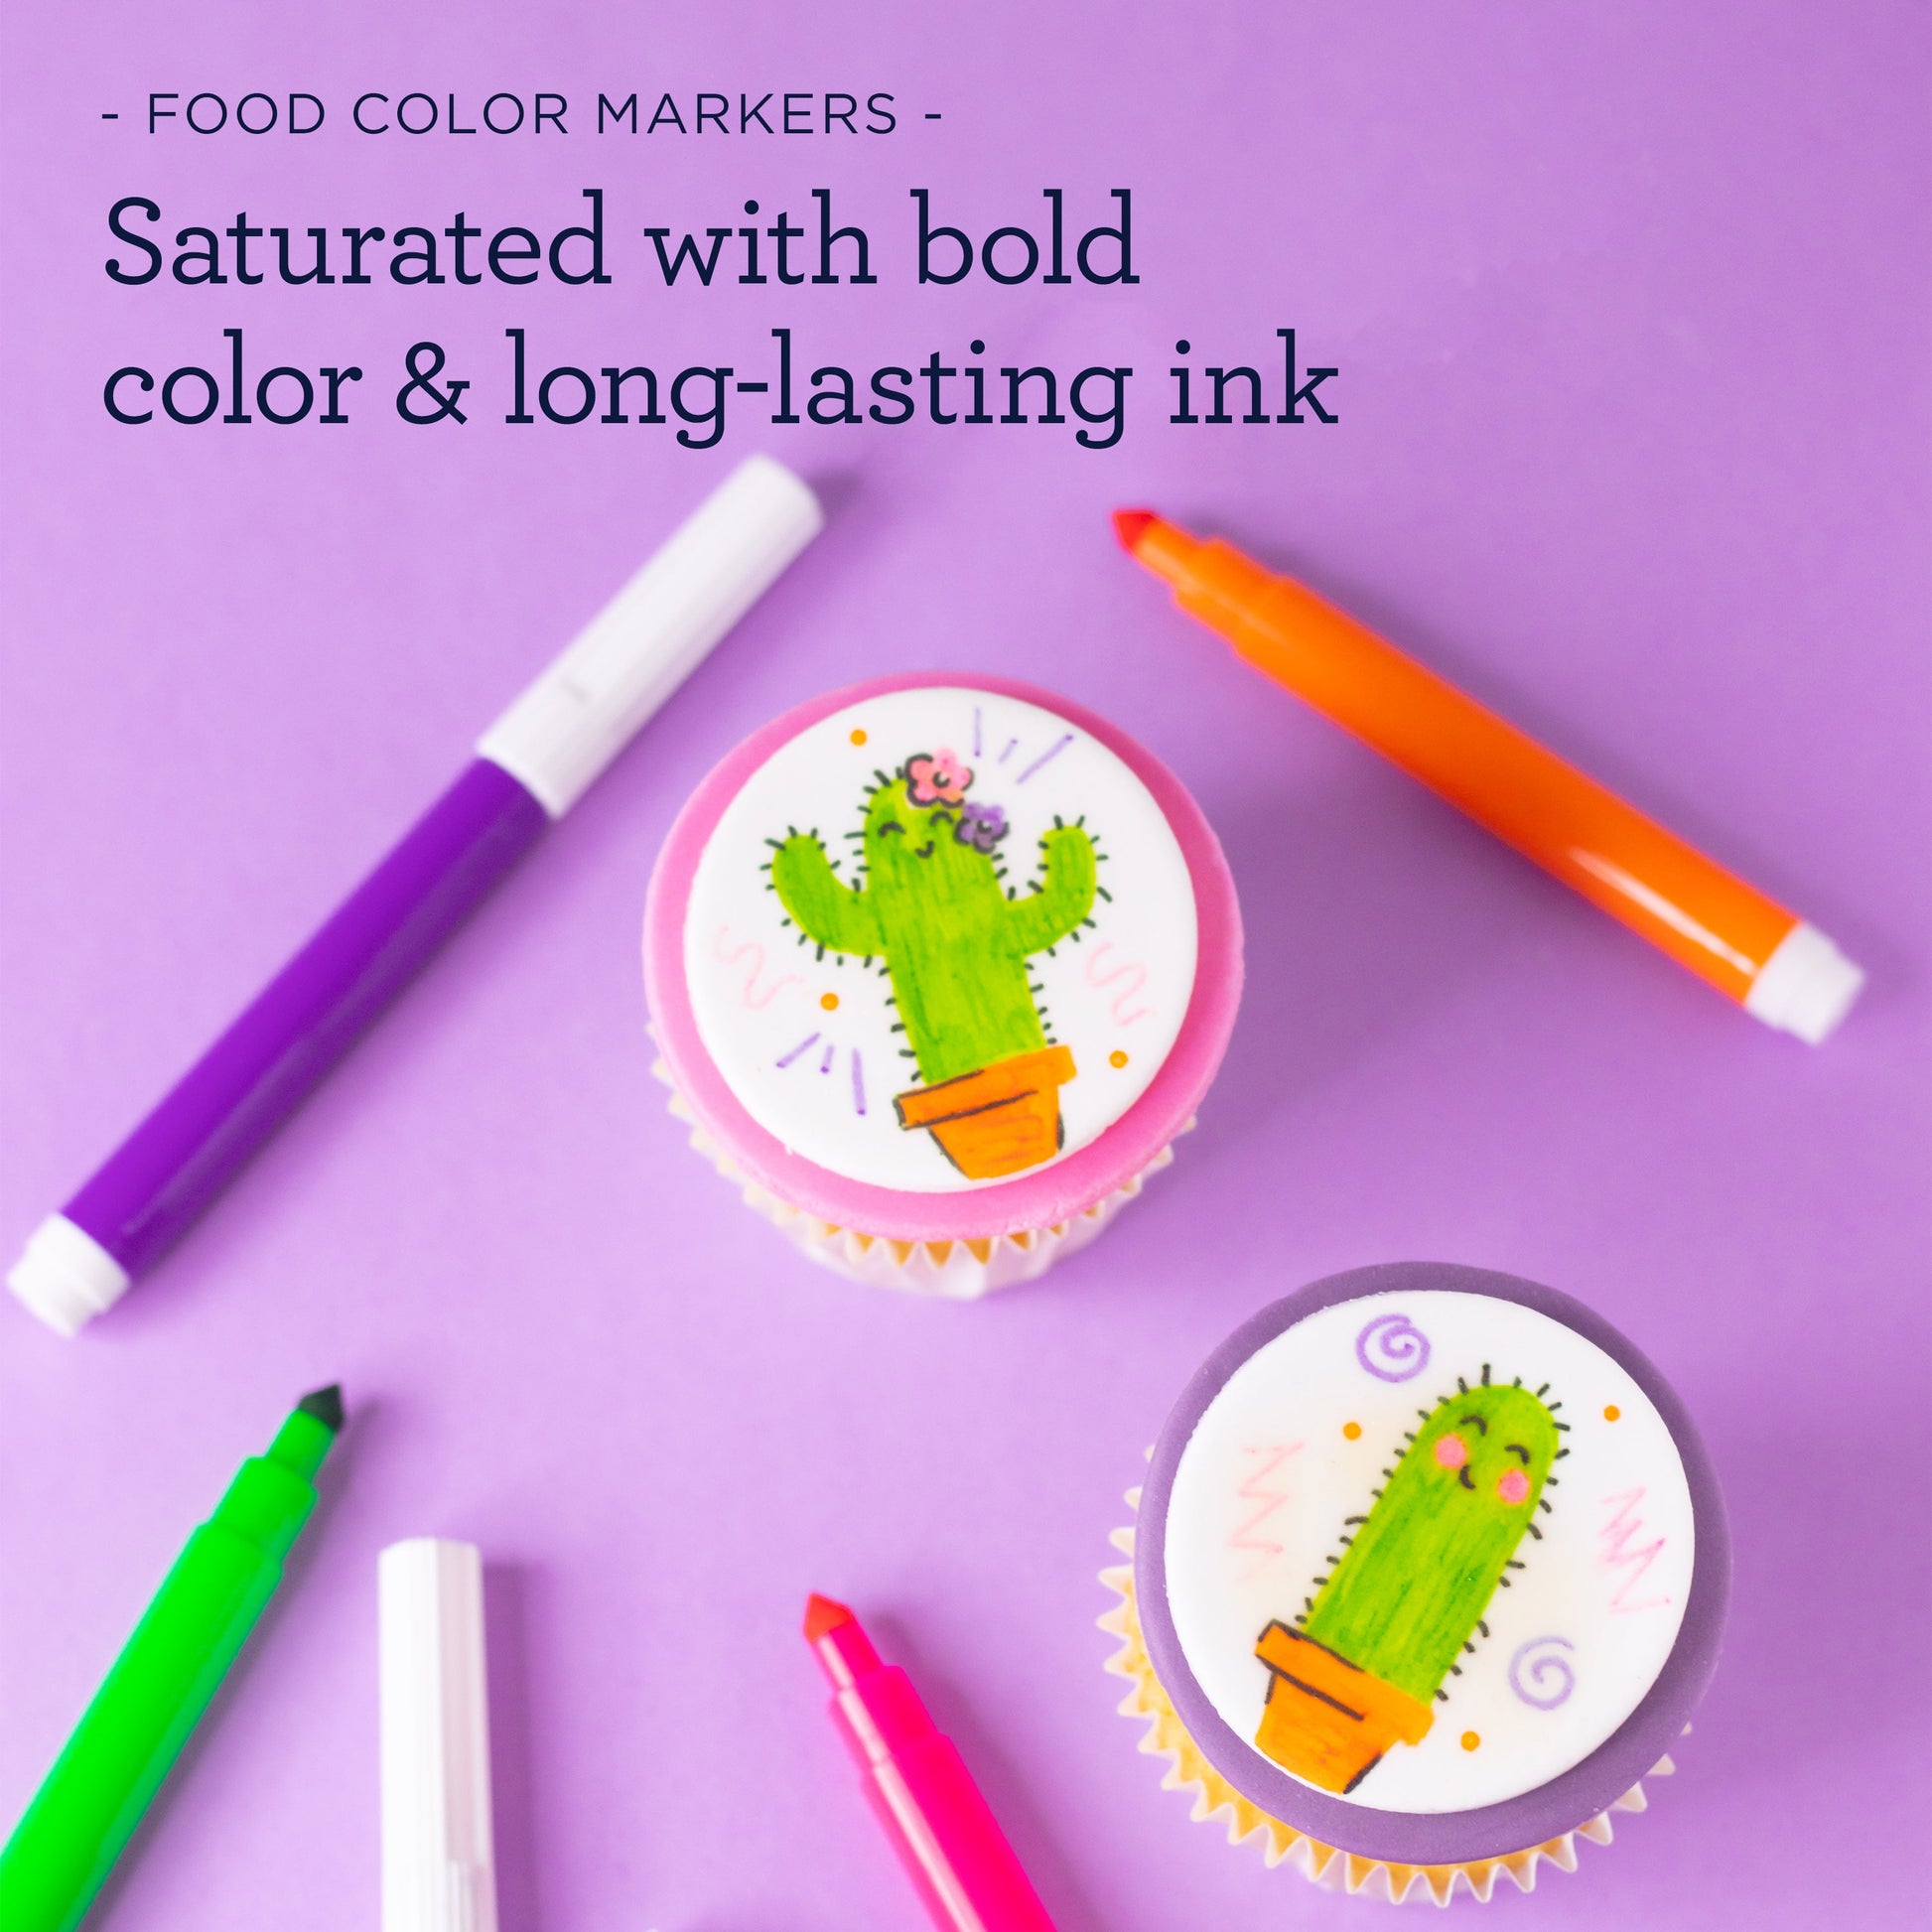 Cheap Promotion Super Soft Tip Painting Markers in 6 Fun Fruit